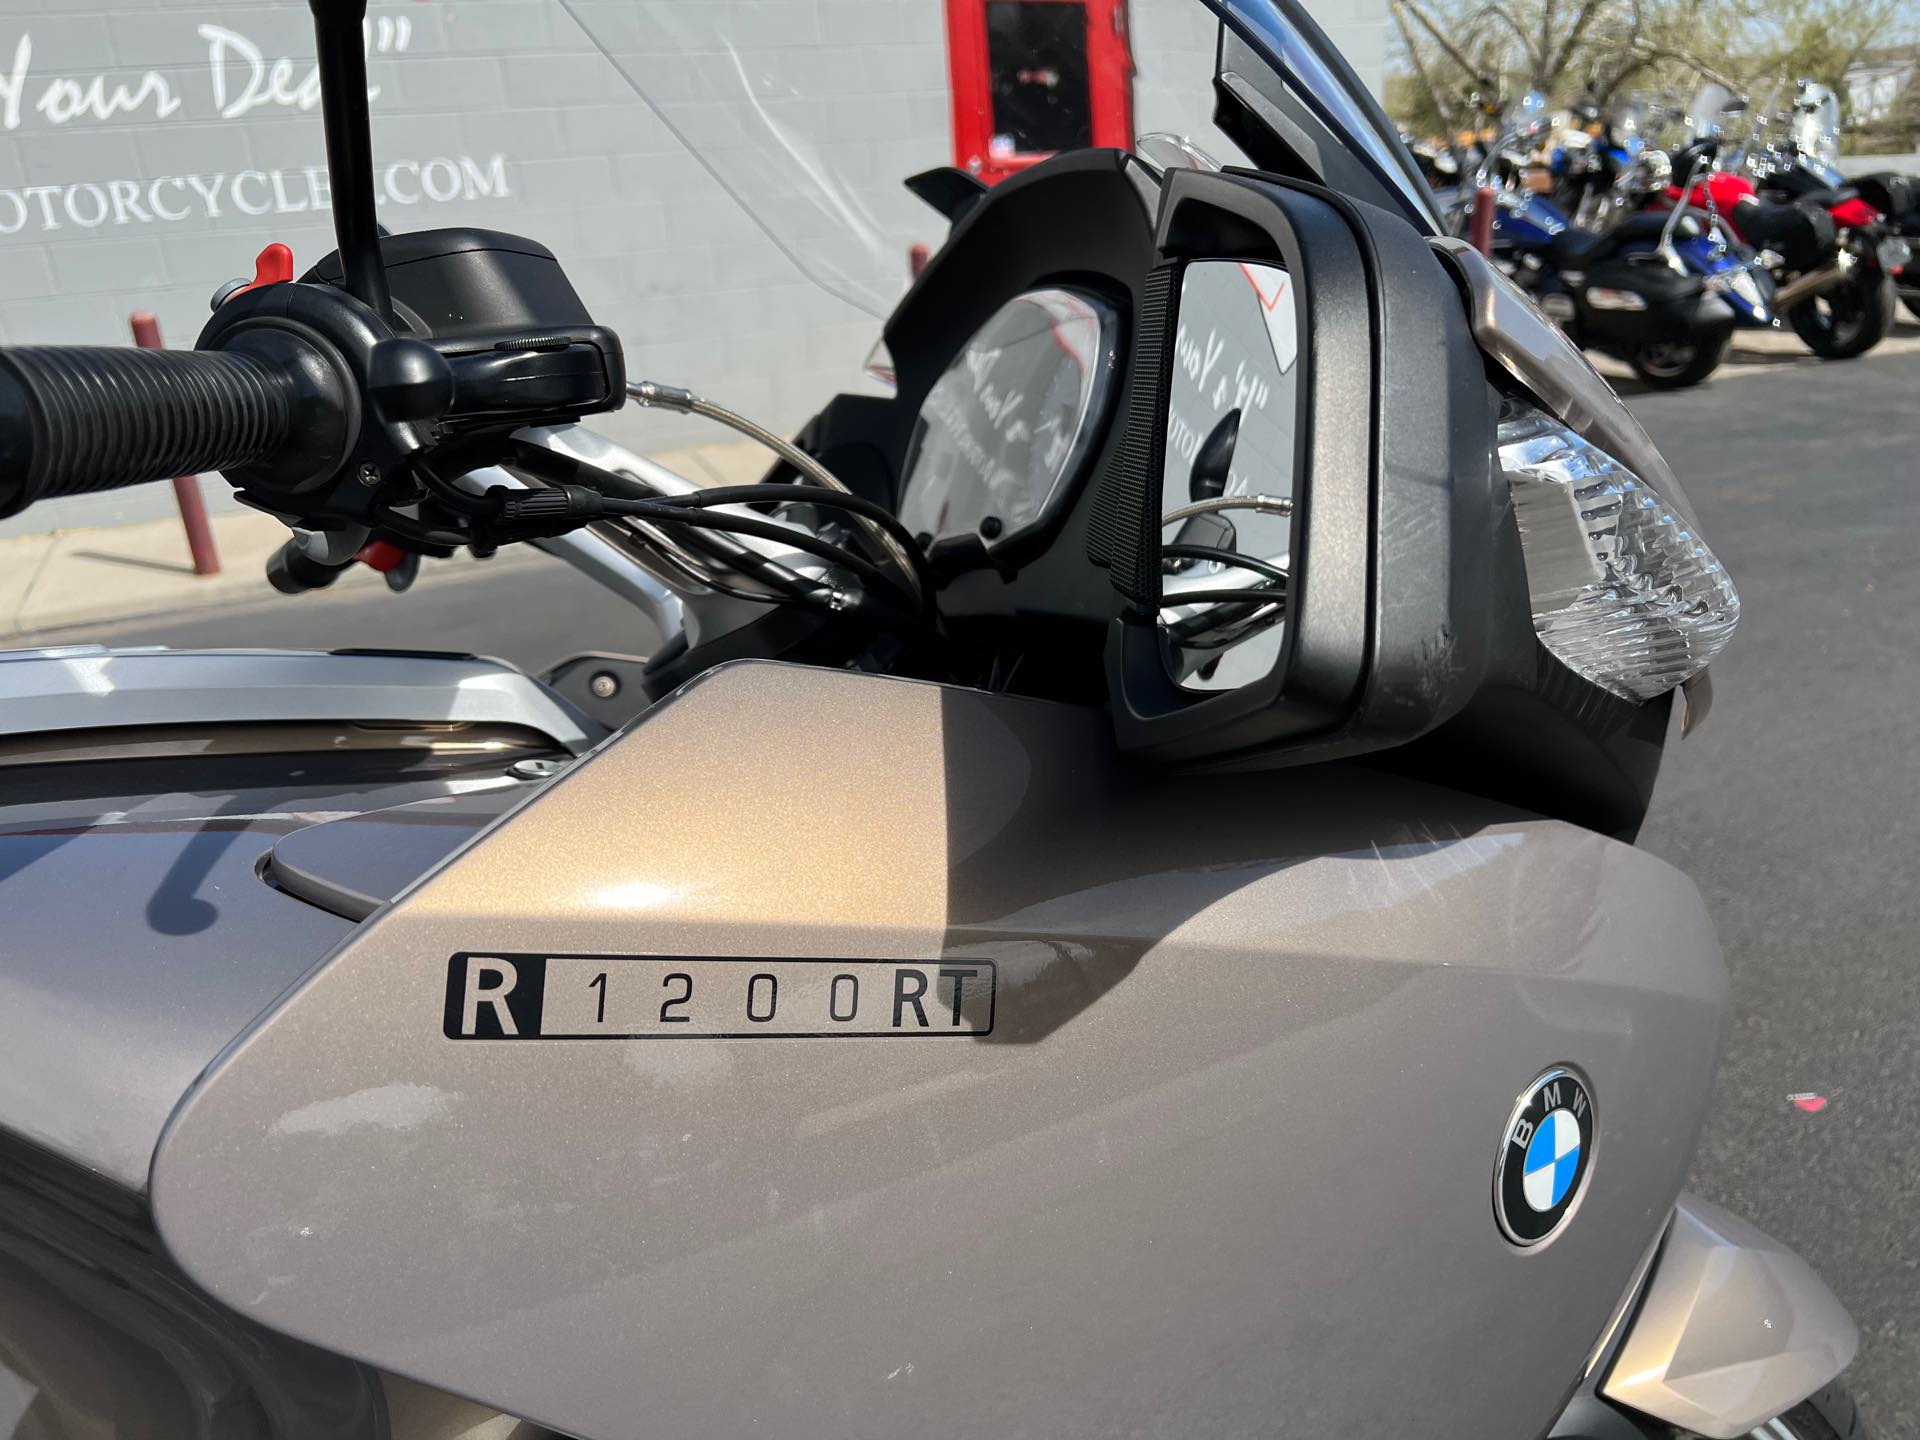 2008 BMW R 1200 RT at Aces Motorcycles - Fort Collins